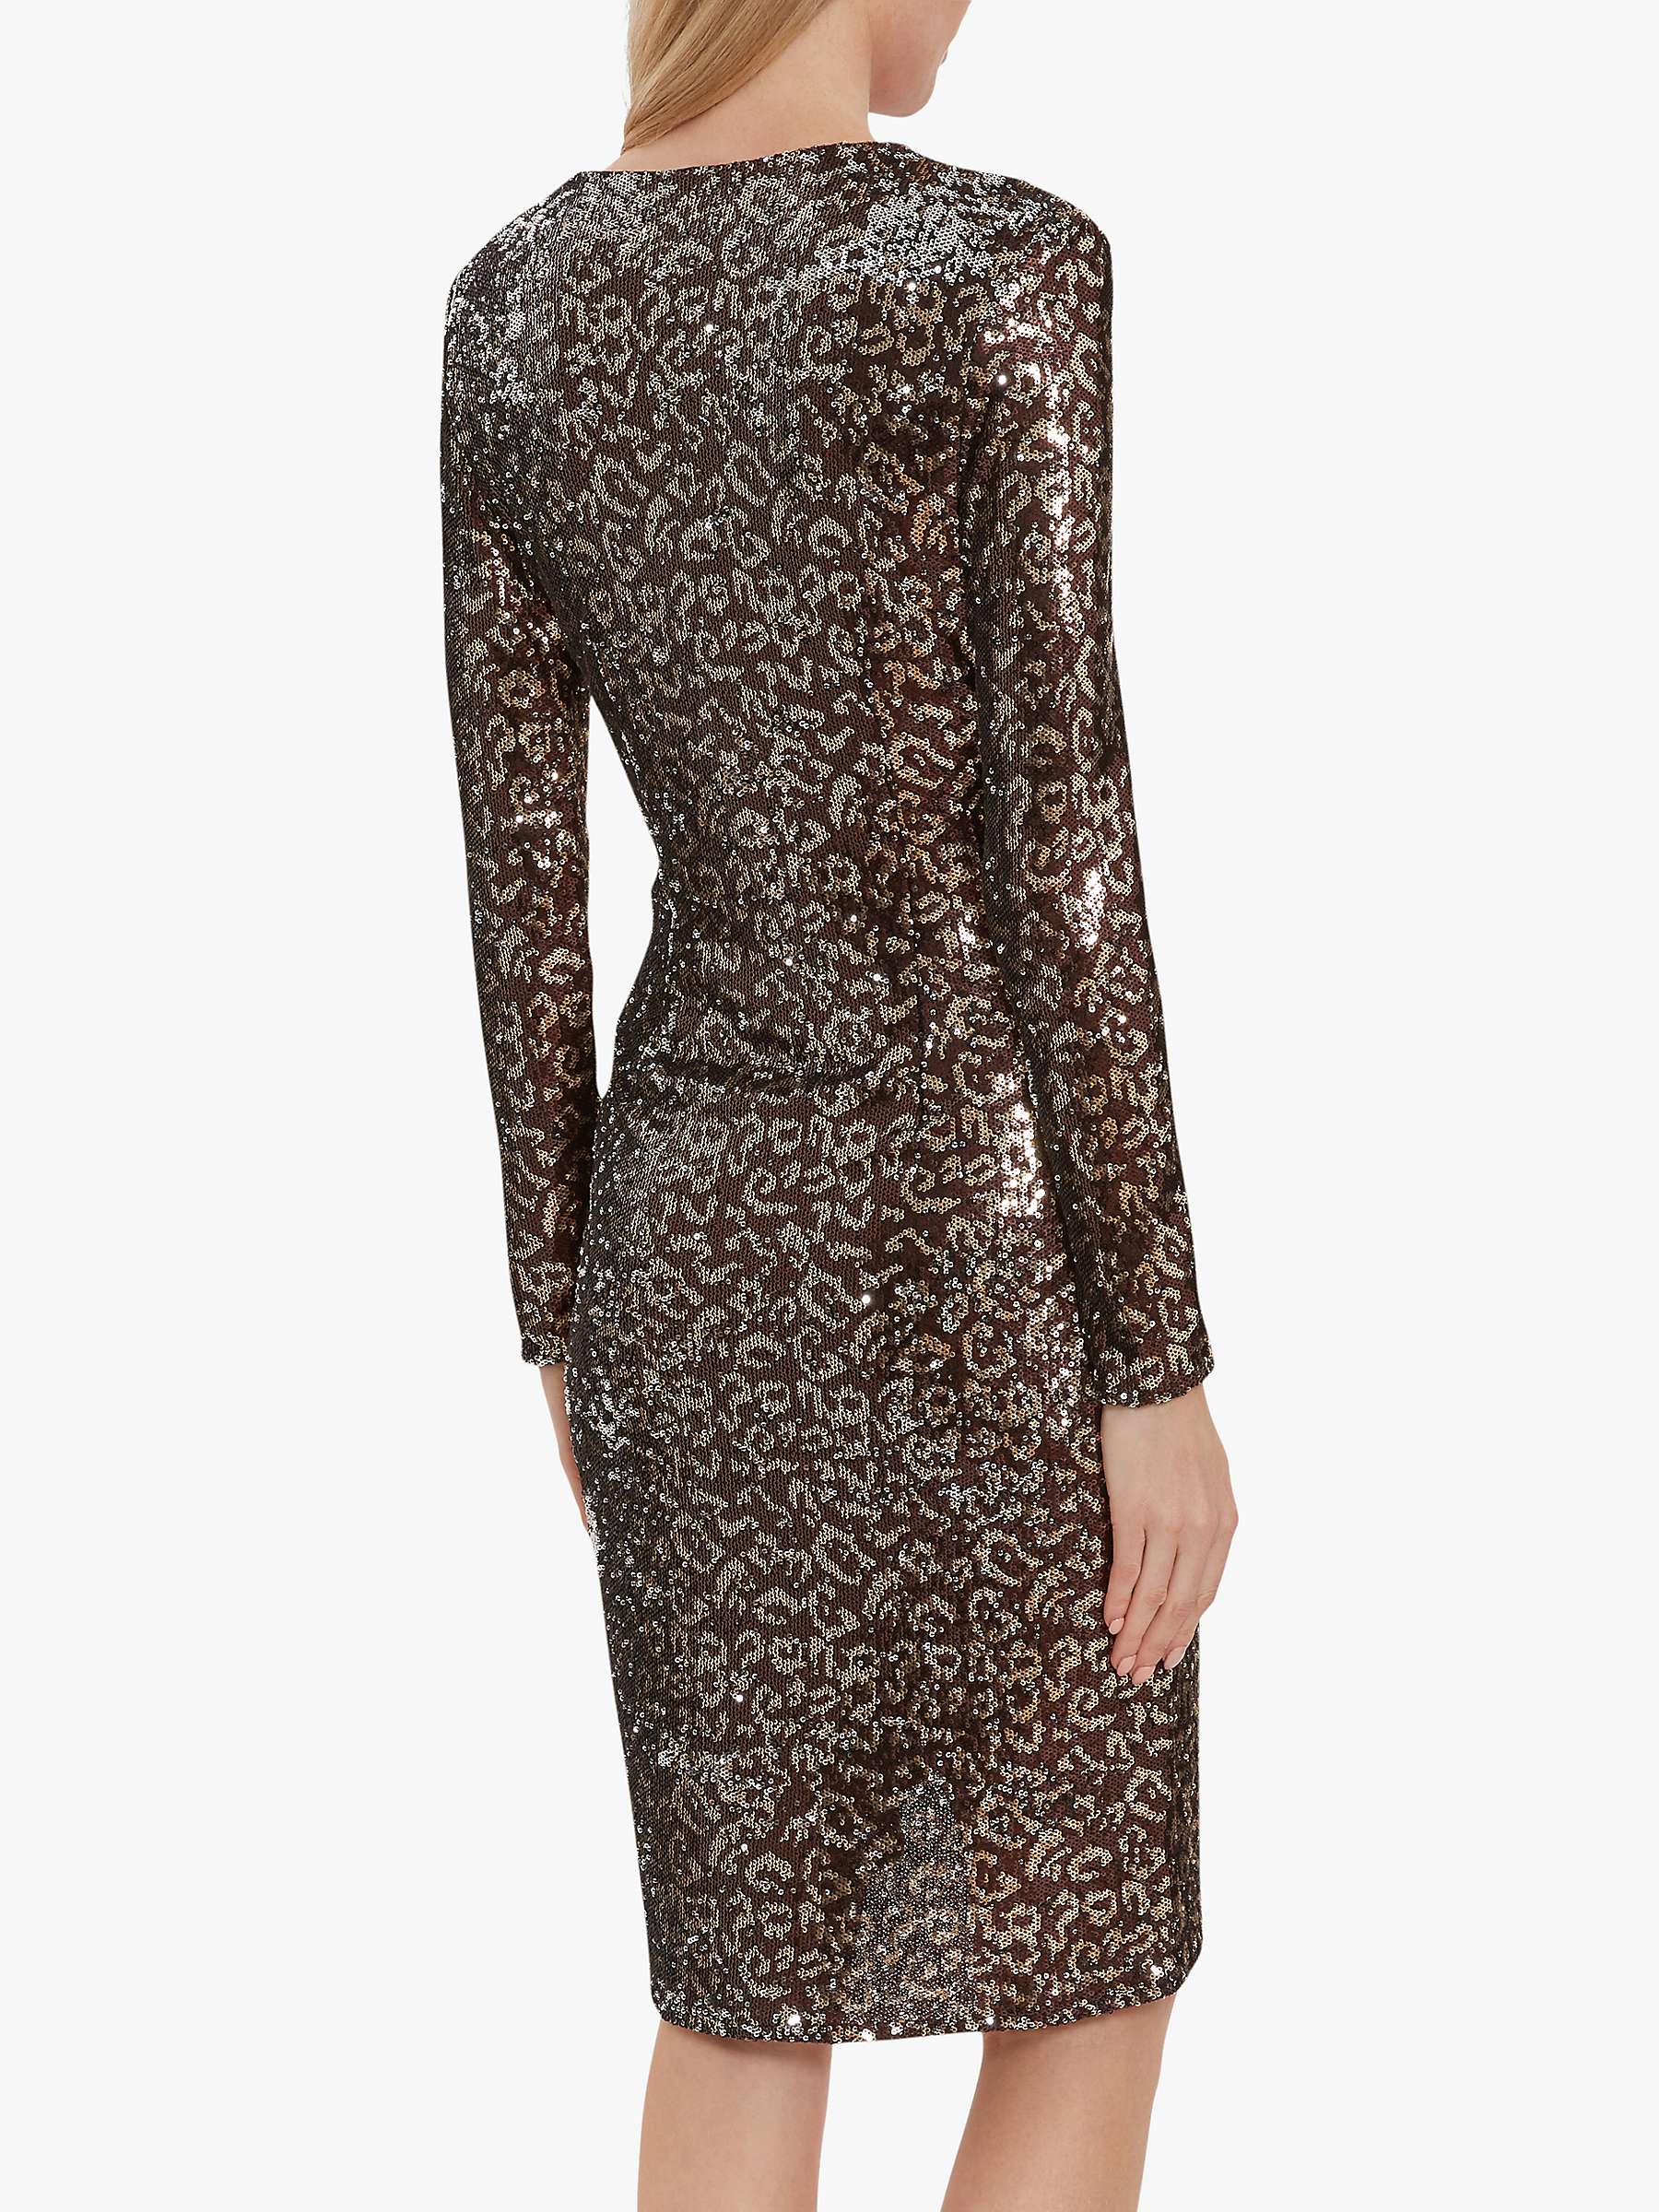 Buy Gina Bacconi Clarice Sequin Leopard Print Wrap Dress, Brown/Gold Online at johnlewis.com